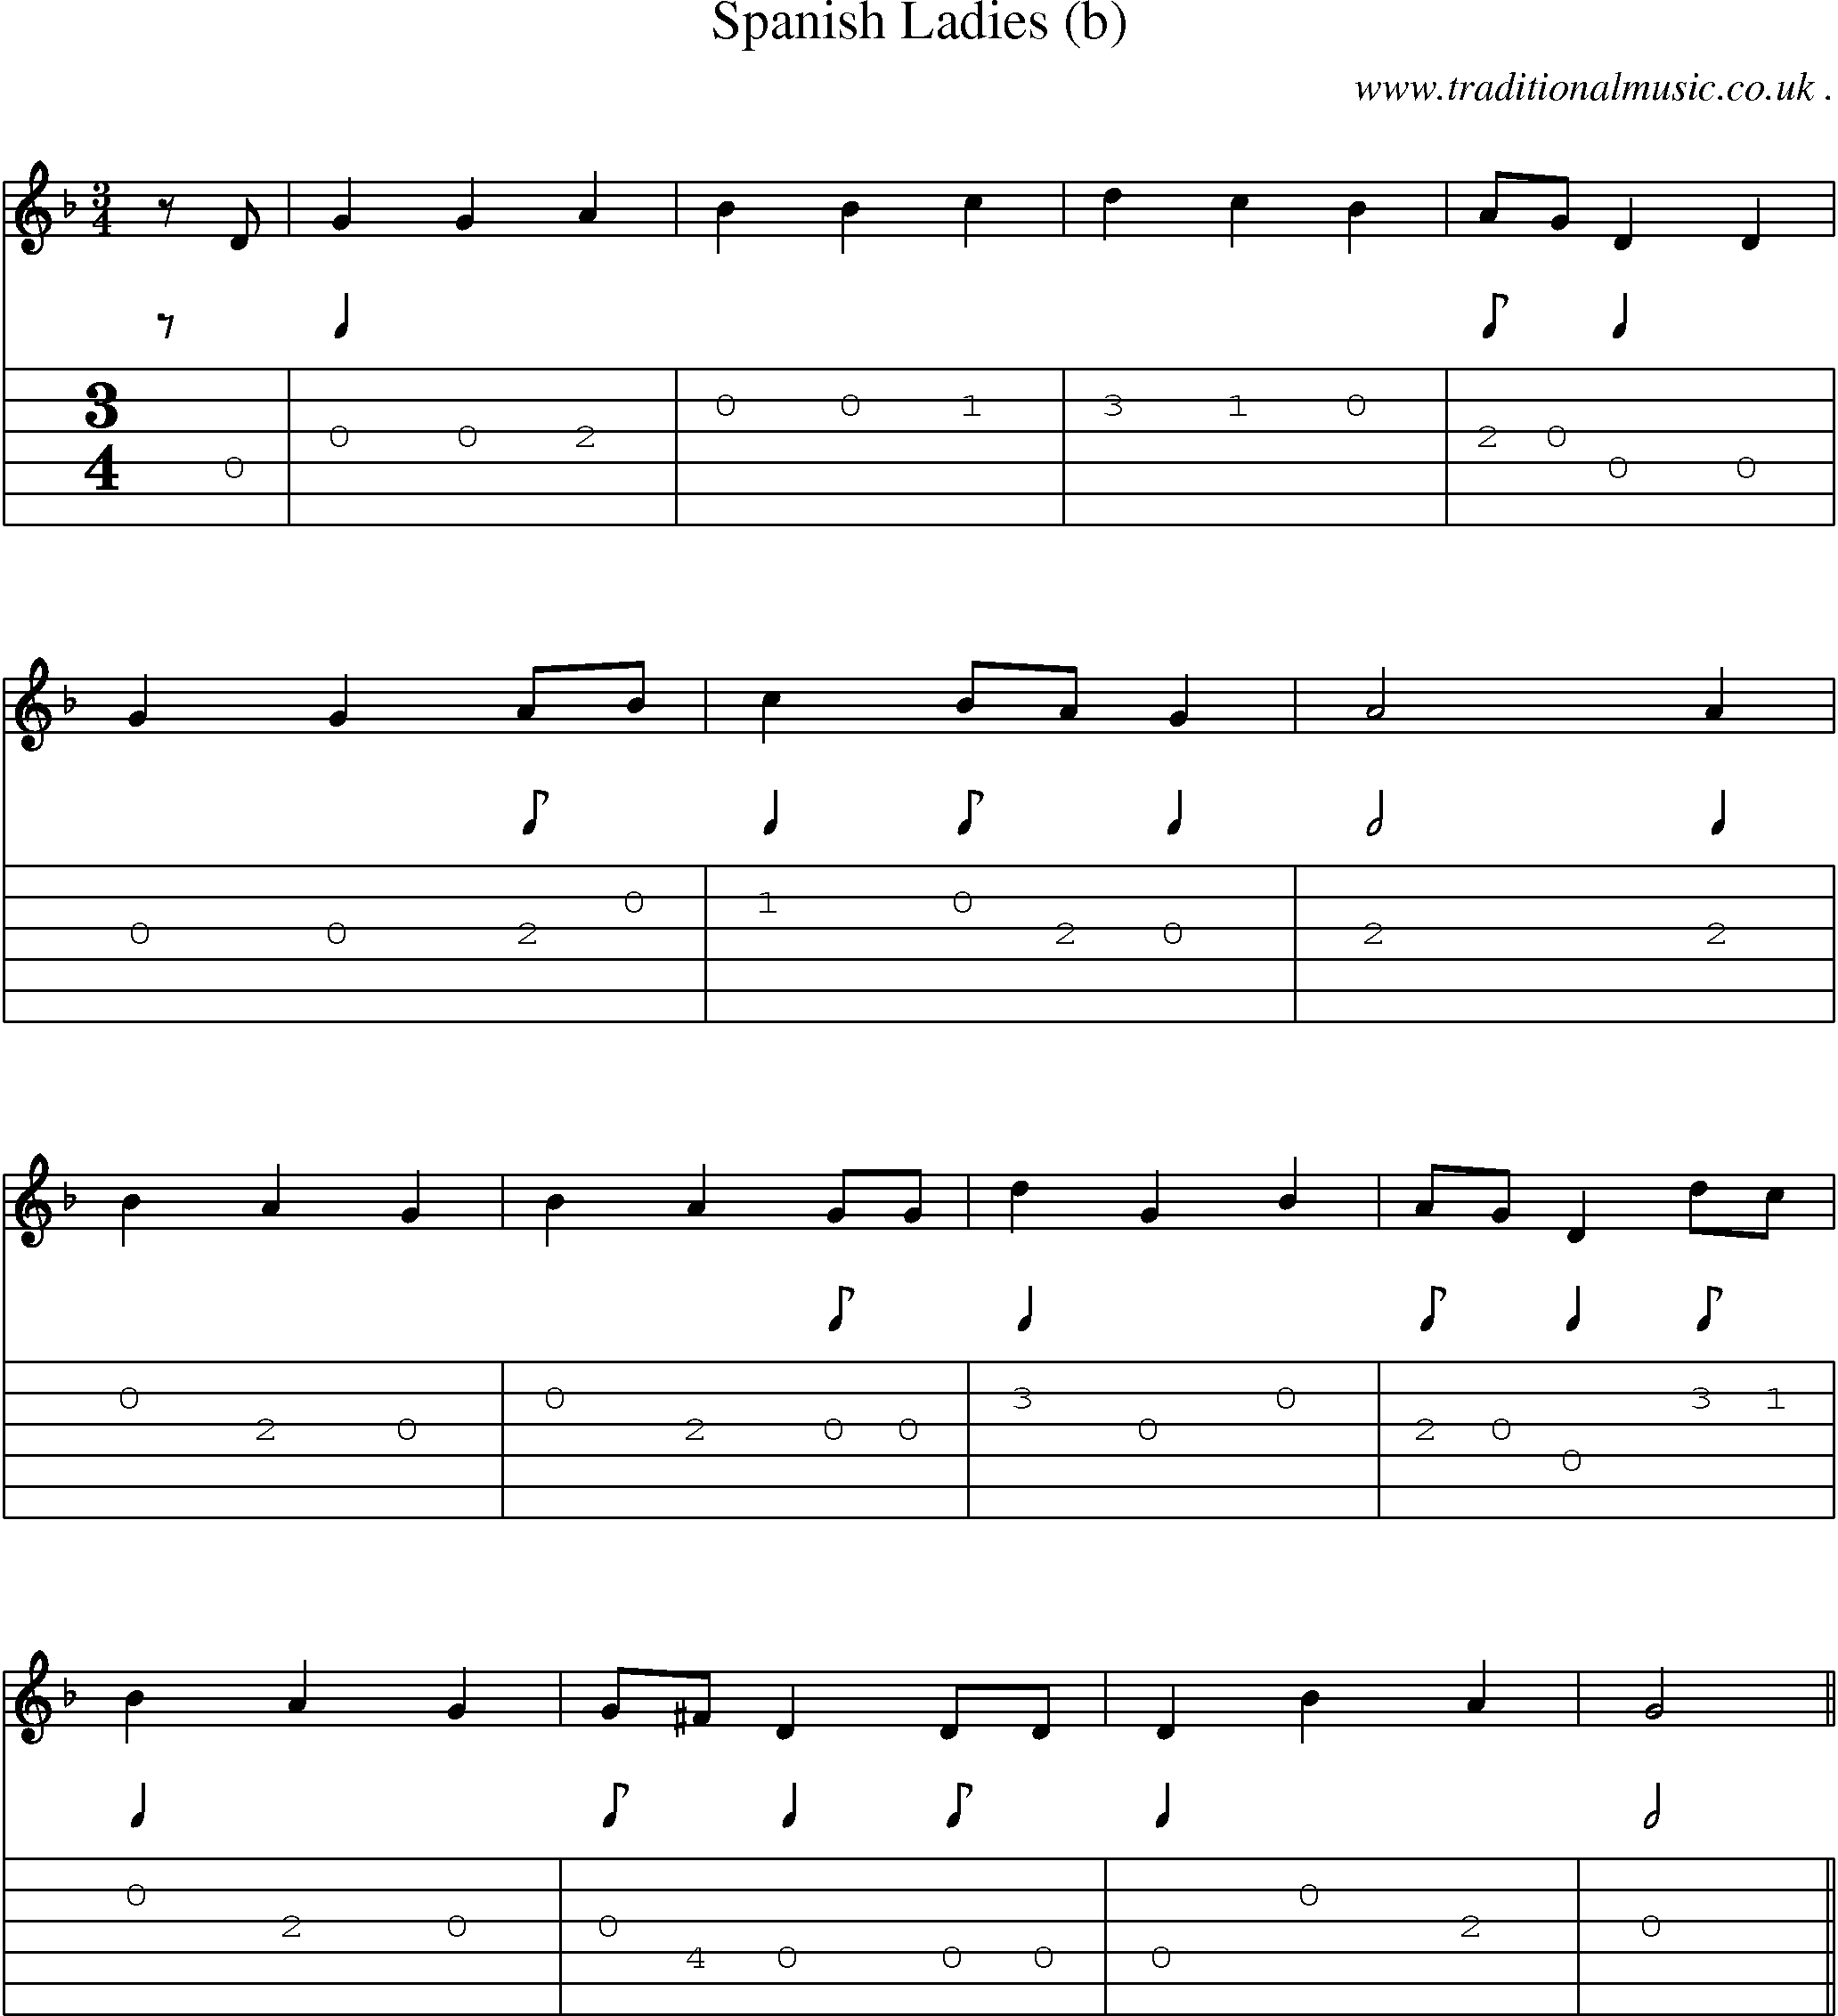 Sheet-Music and Guitar Tabs for Spanish Ladies (b)